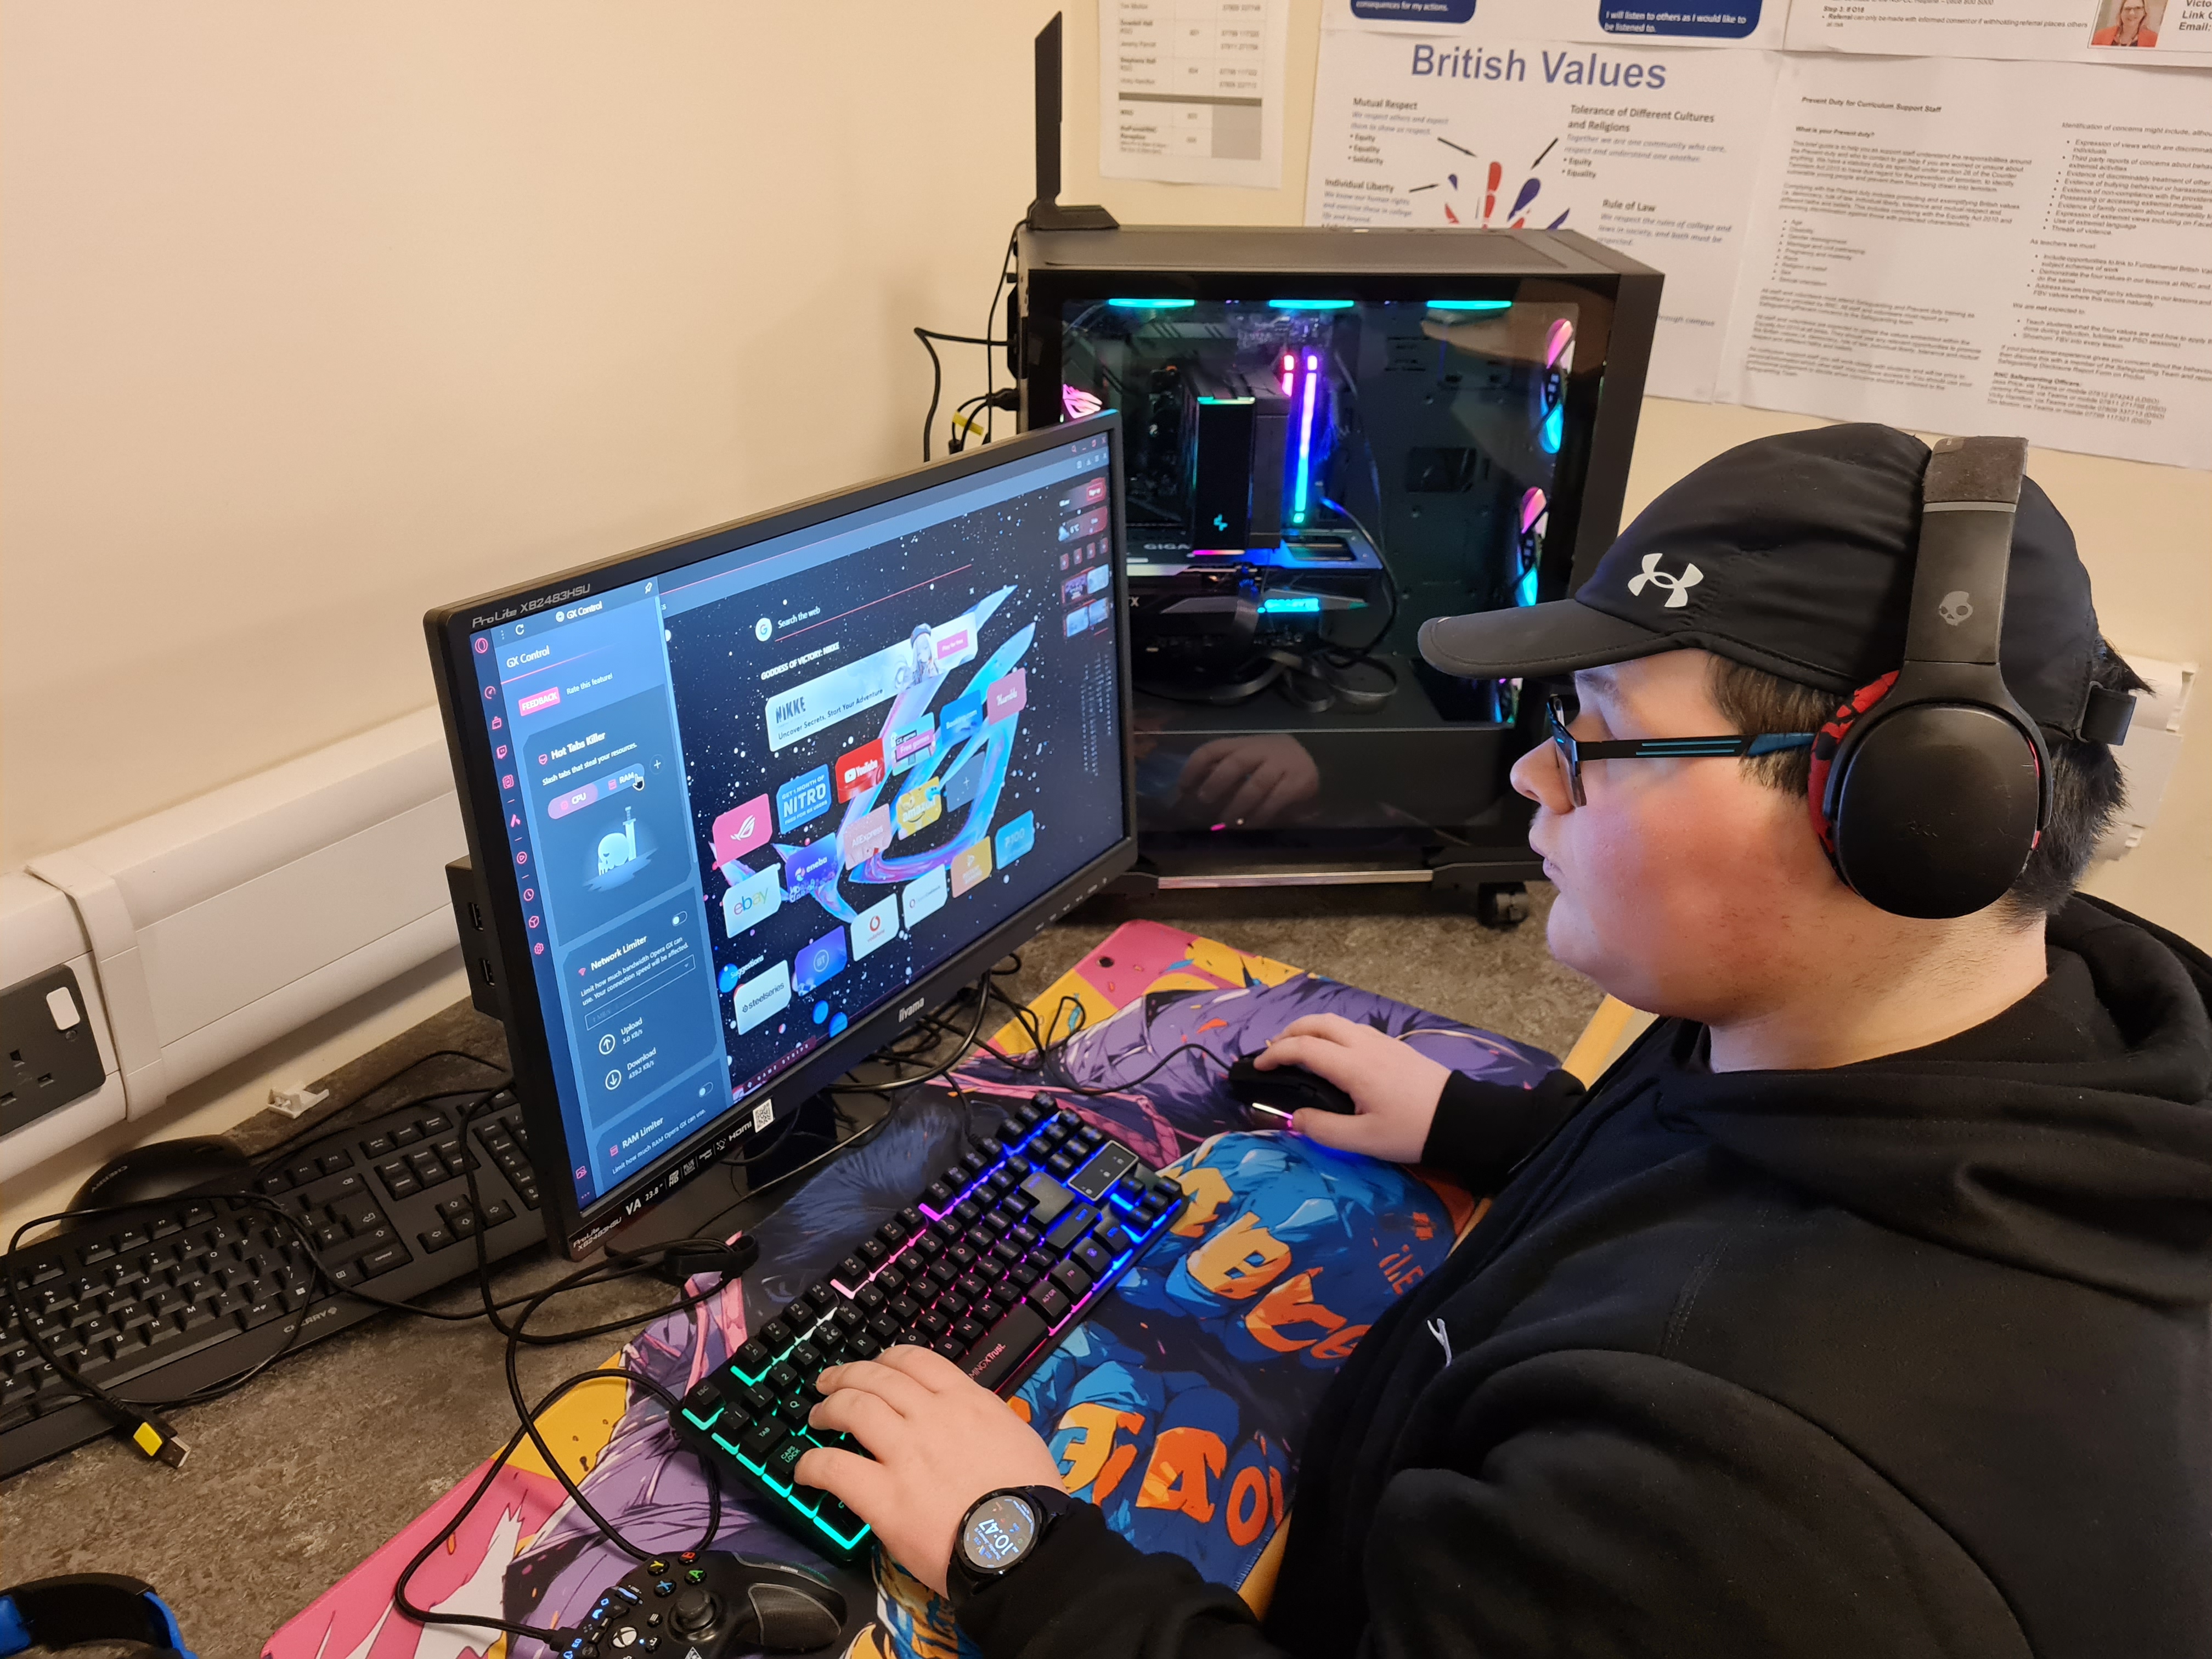 a student wearing headphones tests the newly built PC